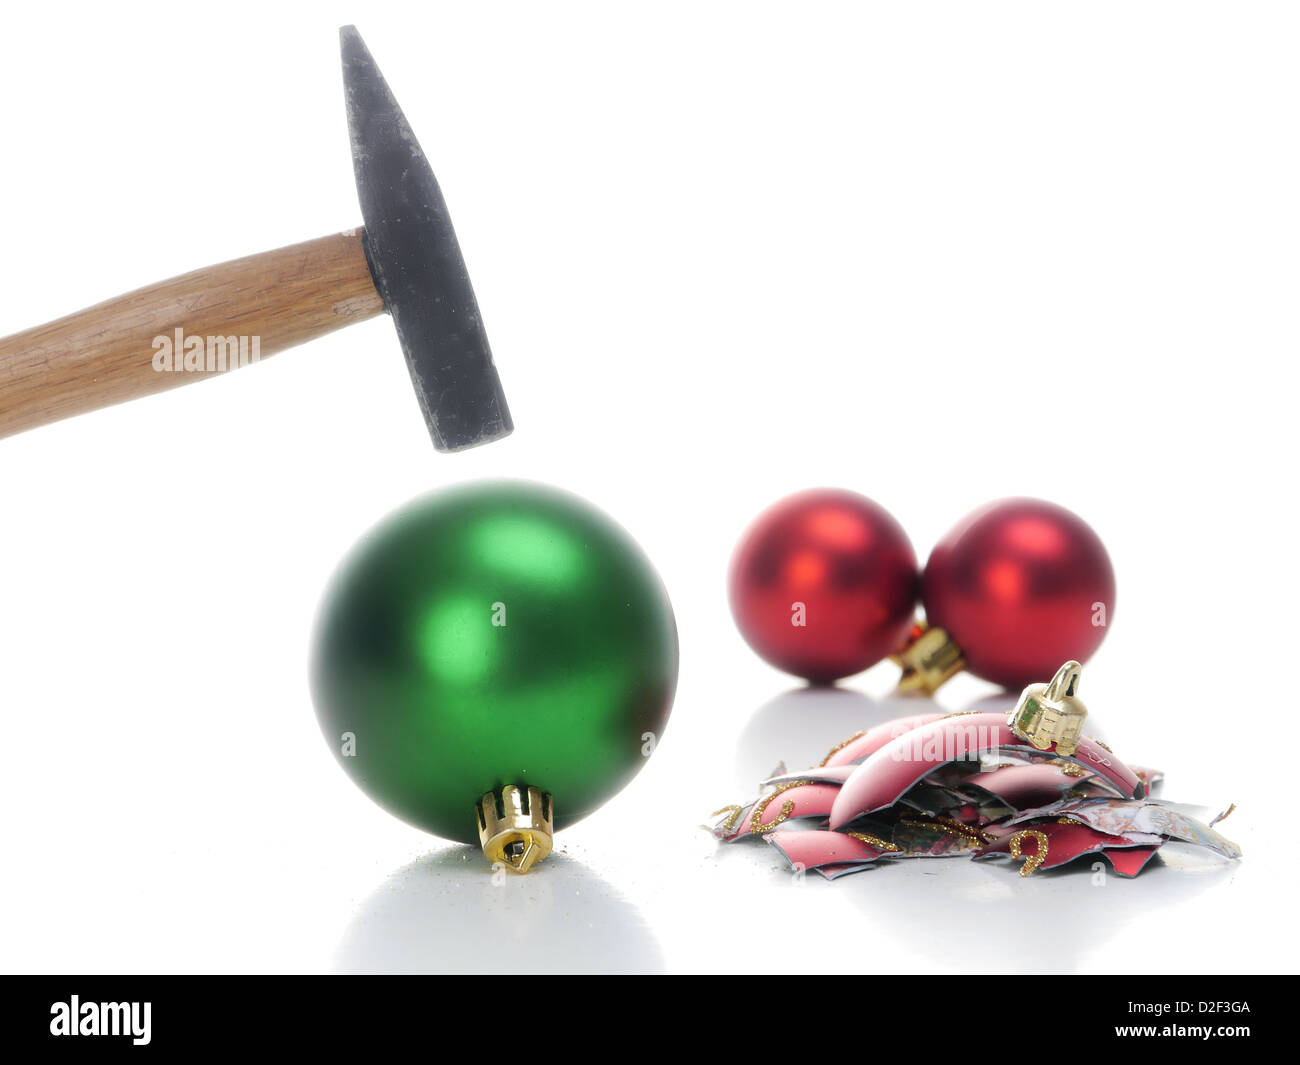 Hammer hitting christmas ball breaking it into pieces - concept depicting aversion to celebrate christmas holidays Stock Photo